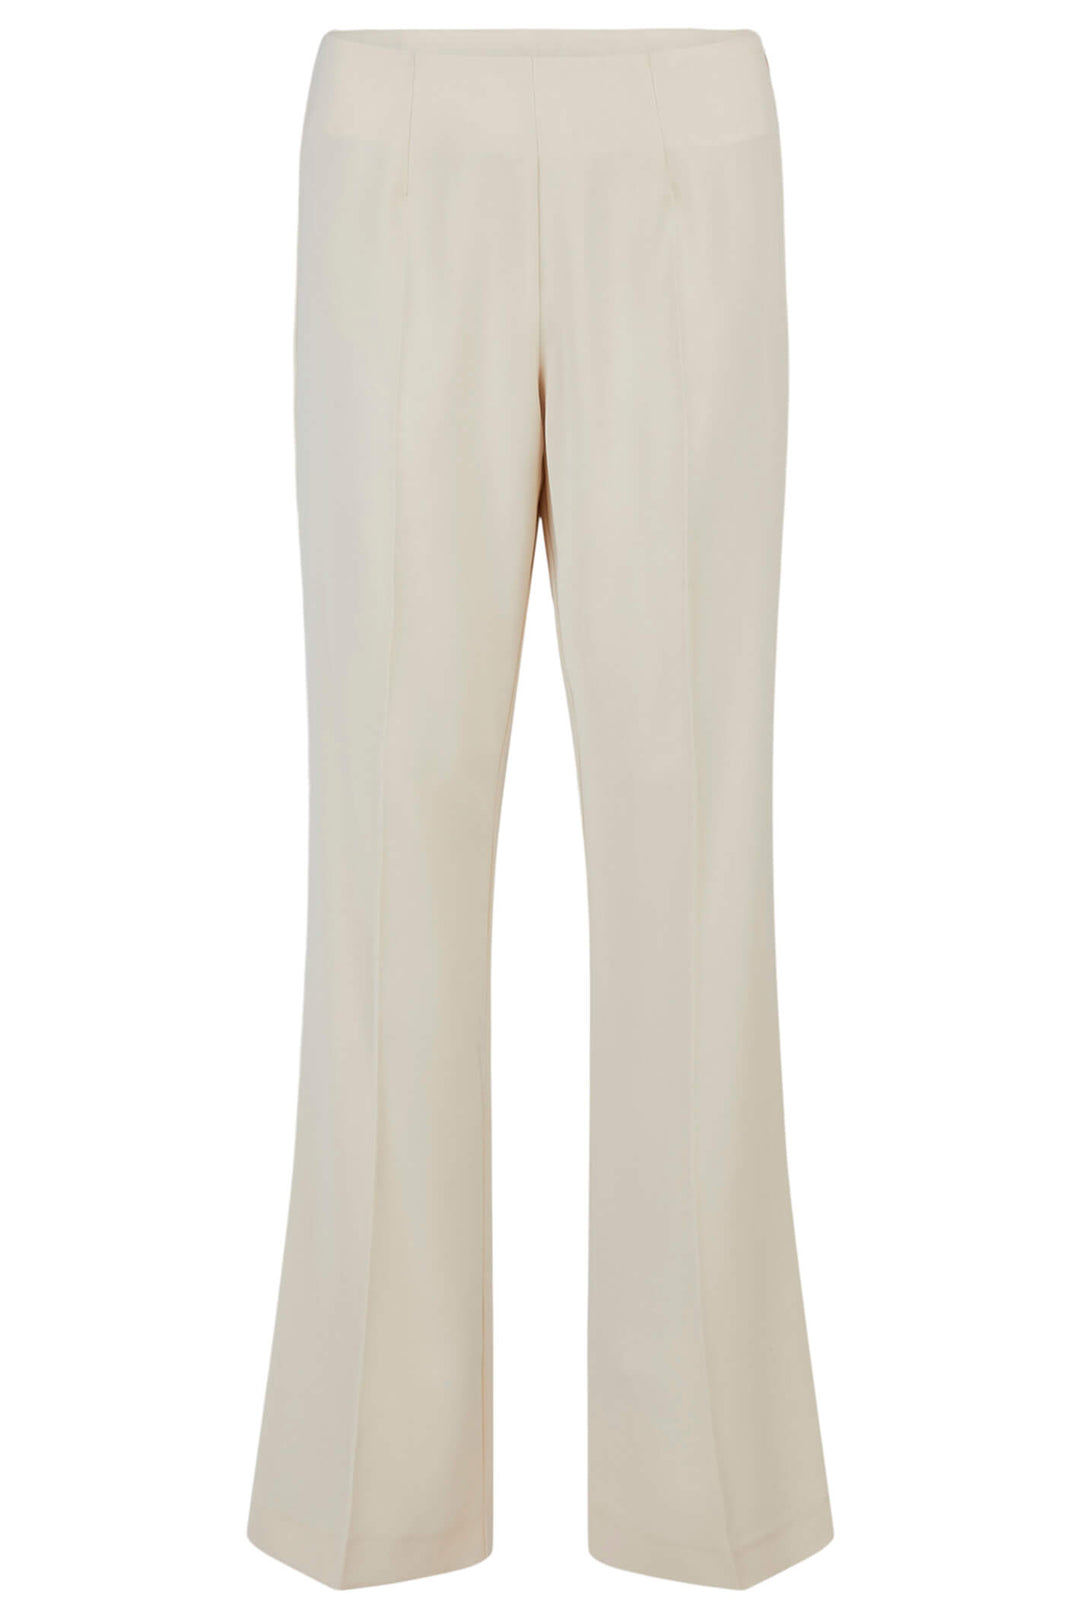 Tia 71305-7054 13 Cream Flared Pull-On Trousers - Dotique